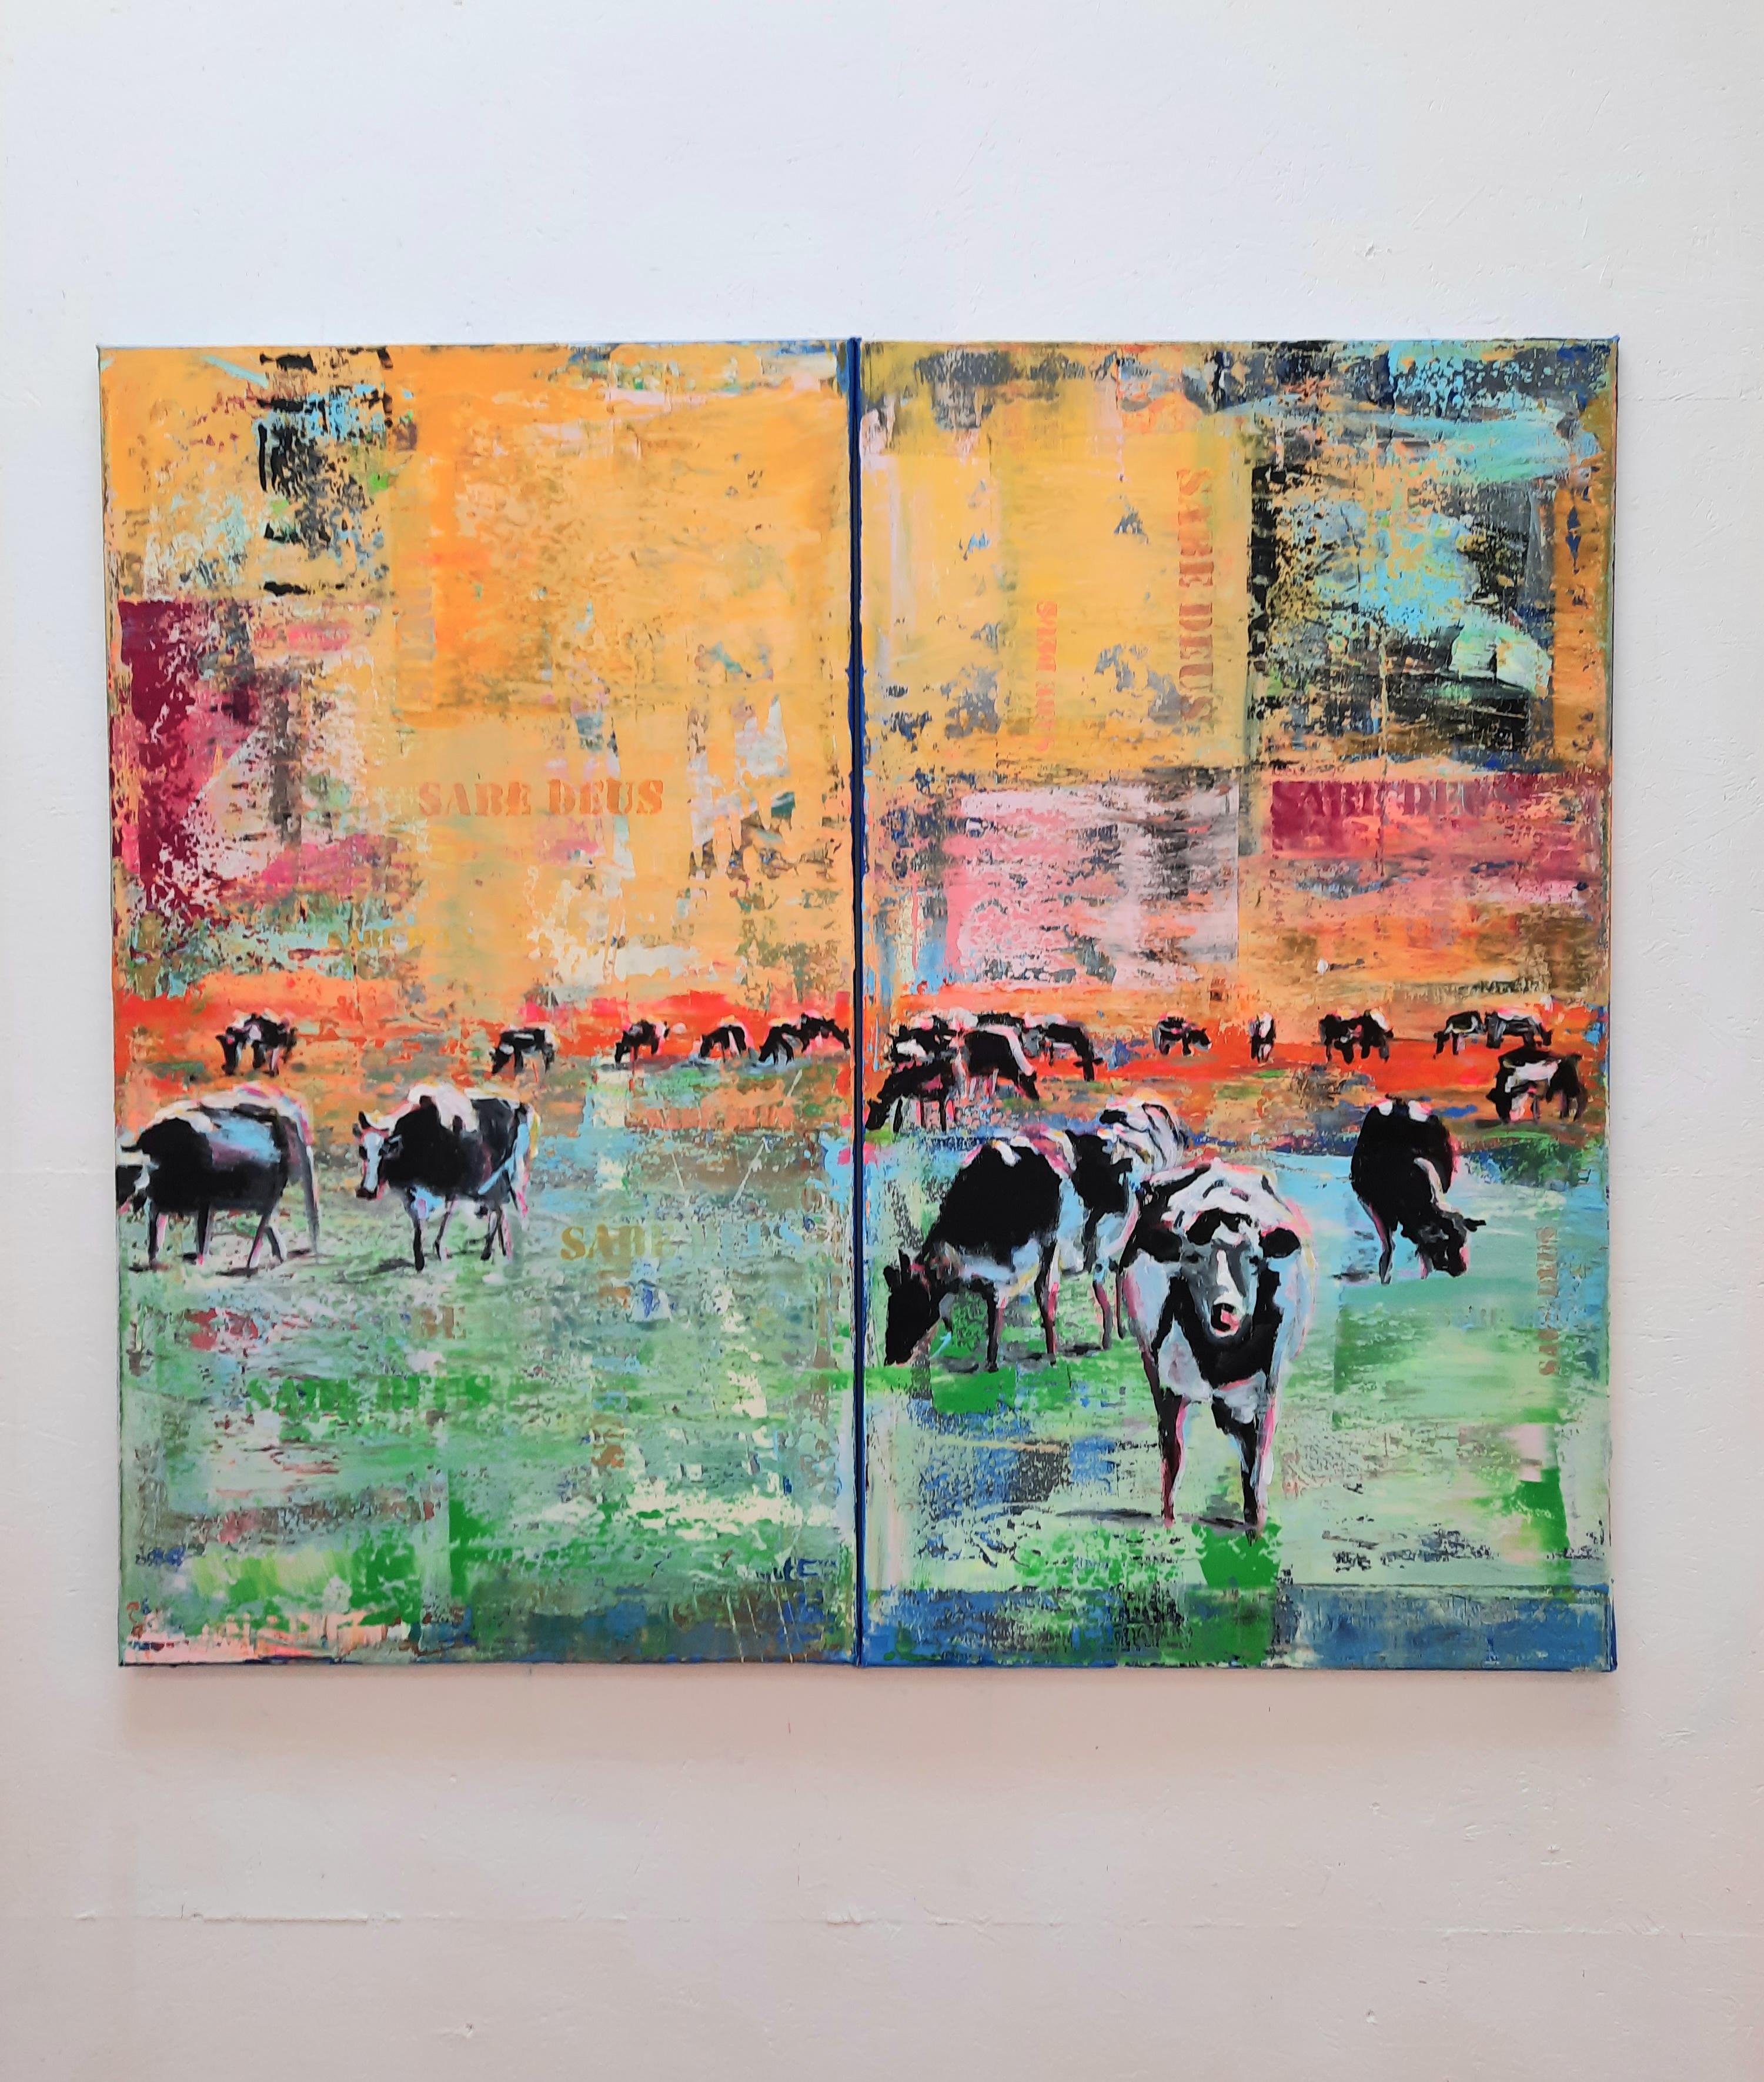 Michael Pröpper Figurative Painting - Cows Nr. 2 - Dyptich, contemporary art, cows figurative with street art elements